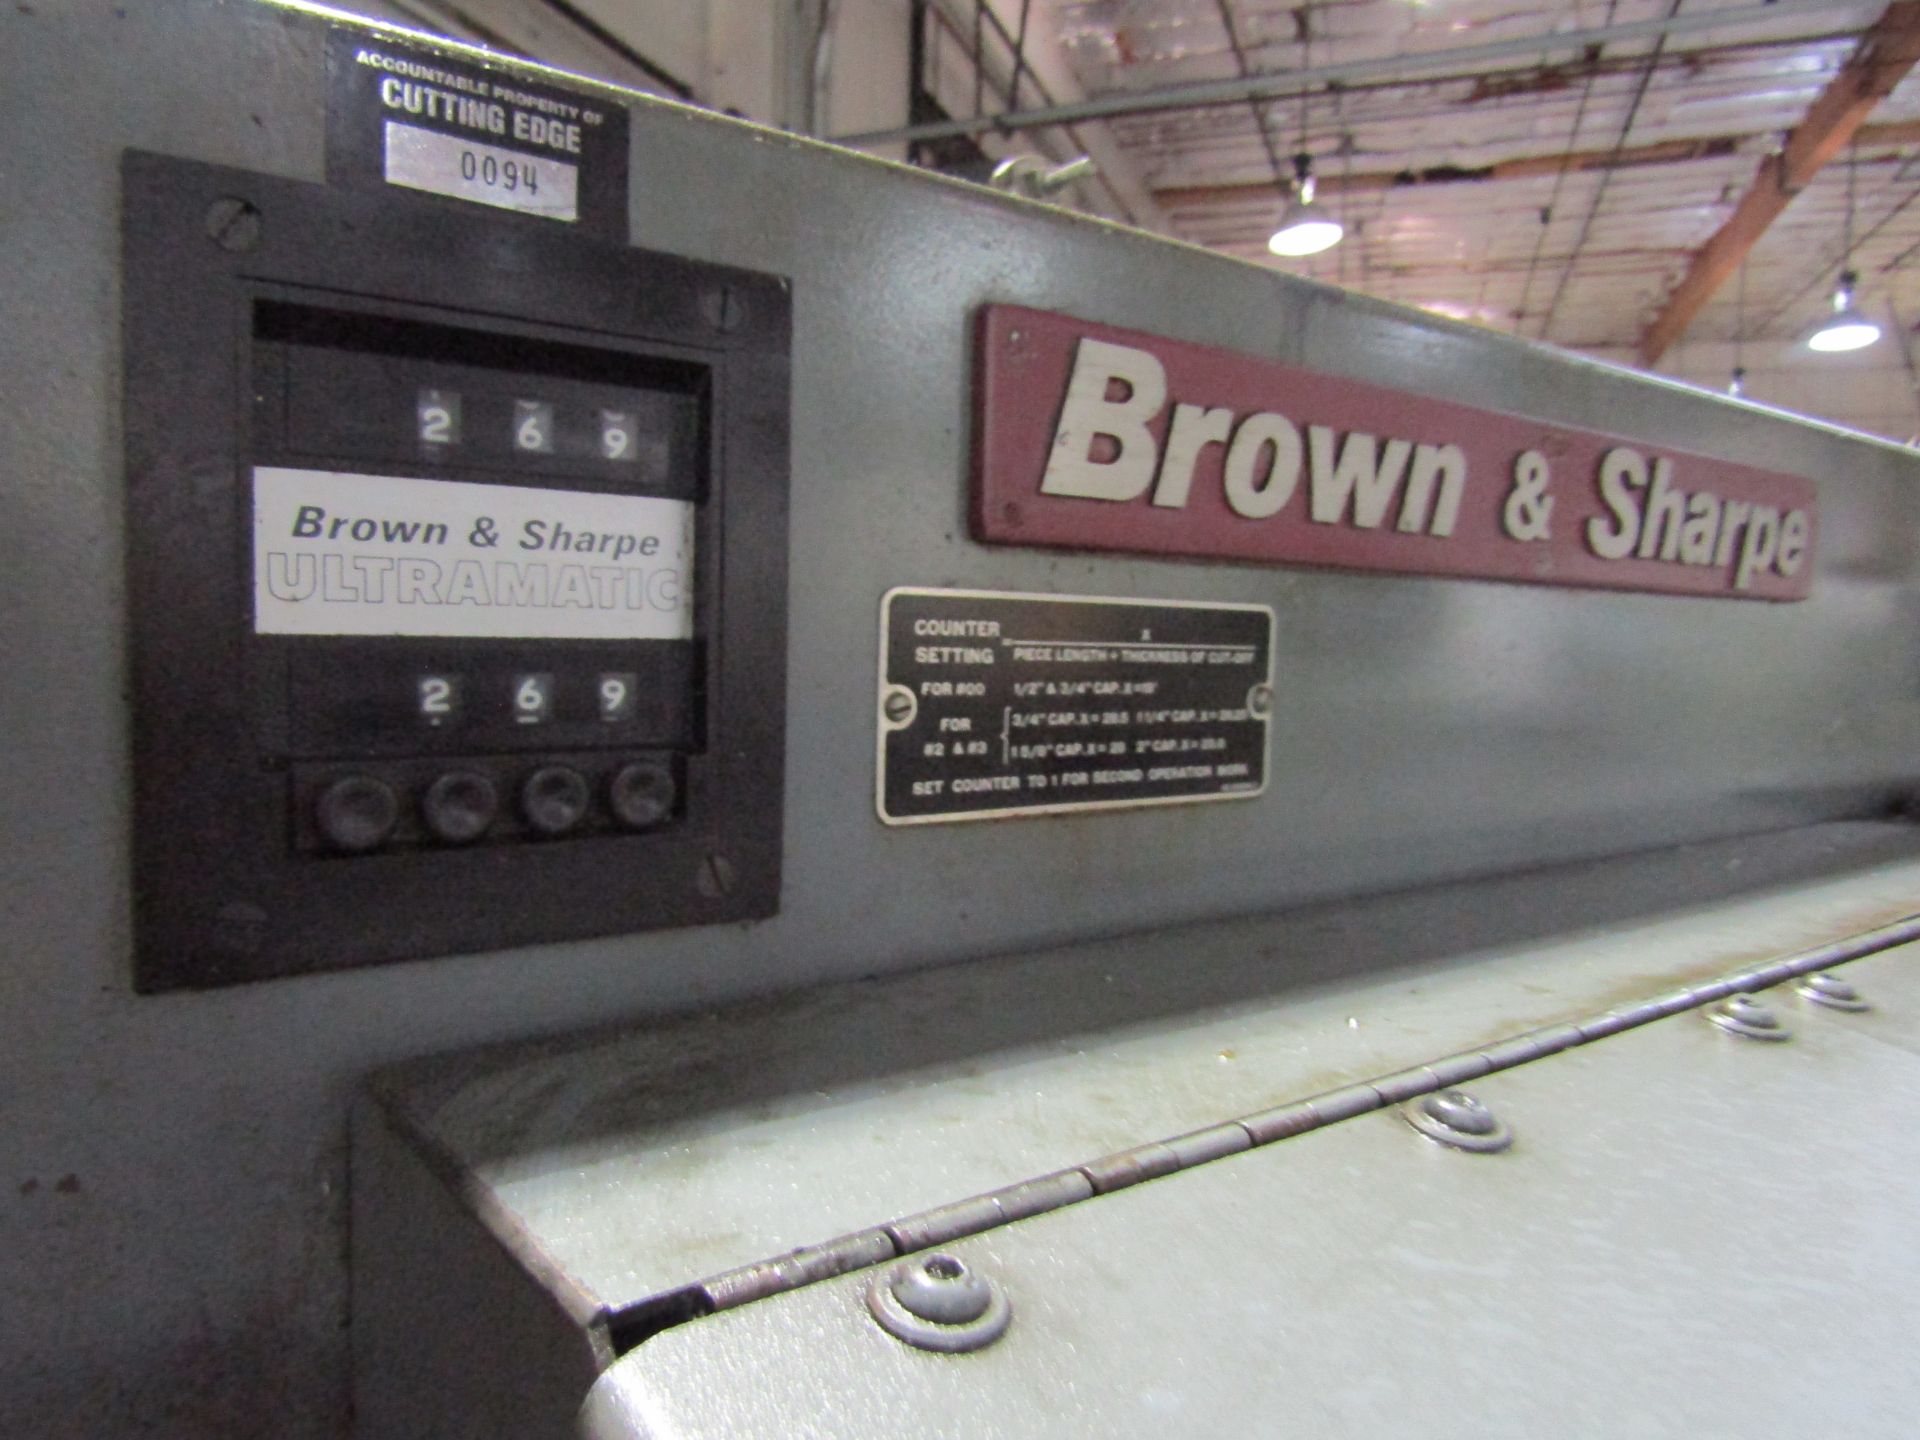 BROWNE & SHARPE AUTOMATIC LATHE SCREW MACHINE, SERIAL 545-2-8122 1 1/4. LOT TO INCLUDE: ASSOCIATED - Image 5 of 9